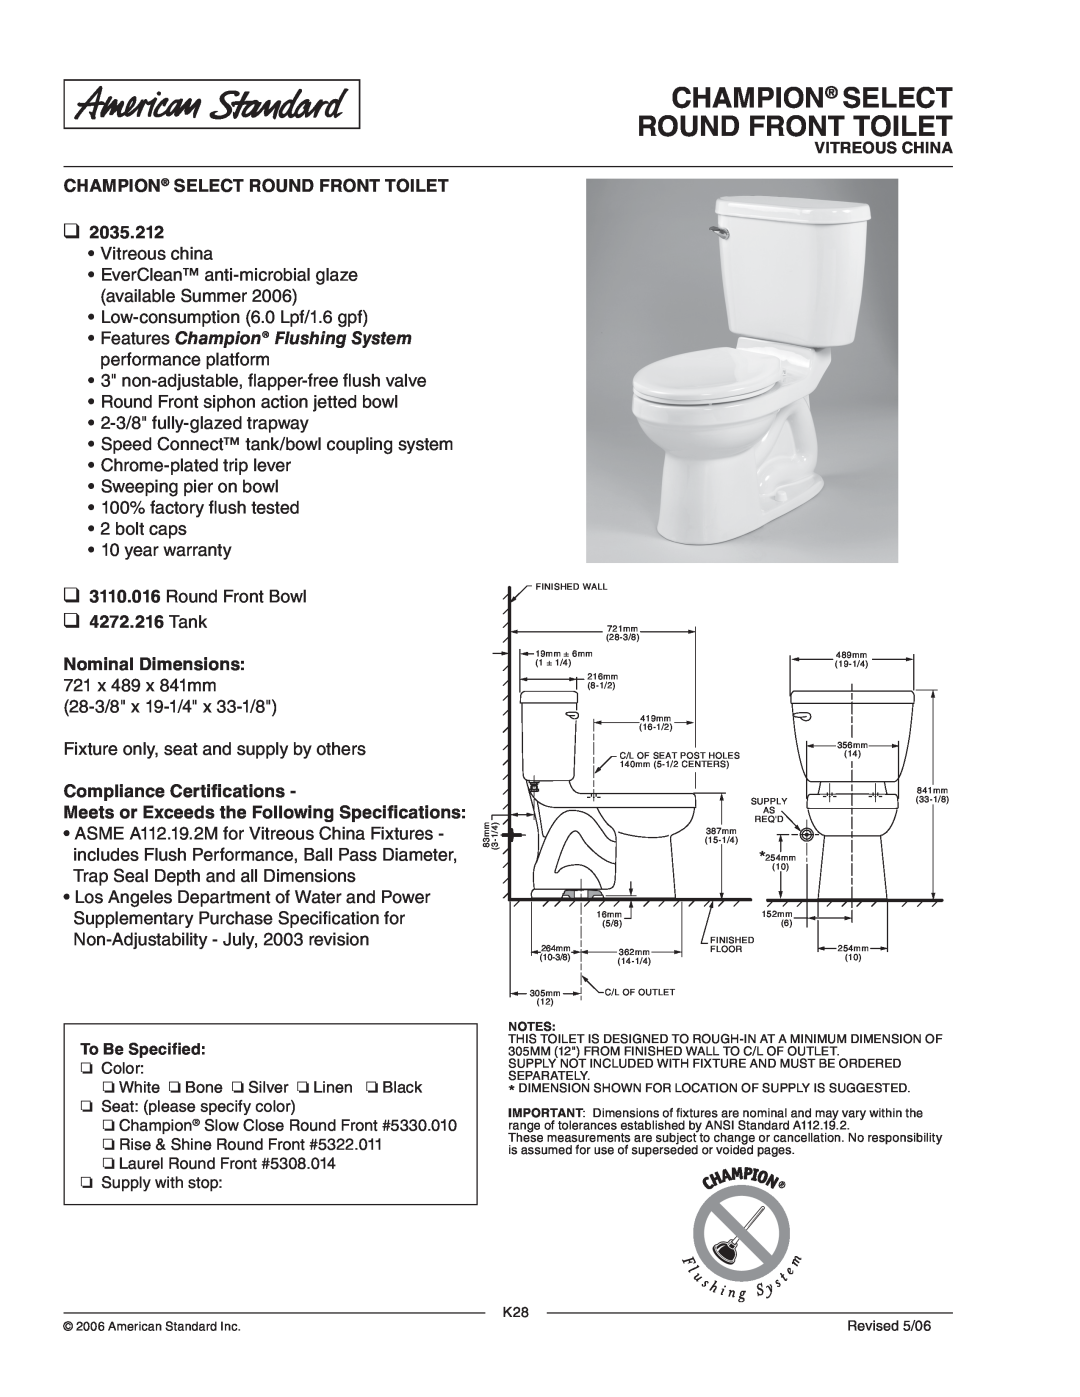 American Standard 2035.212 dimensions Champion Select Round Front Toilet, Tank Nominal Dimensions 